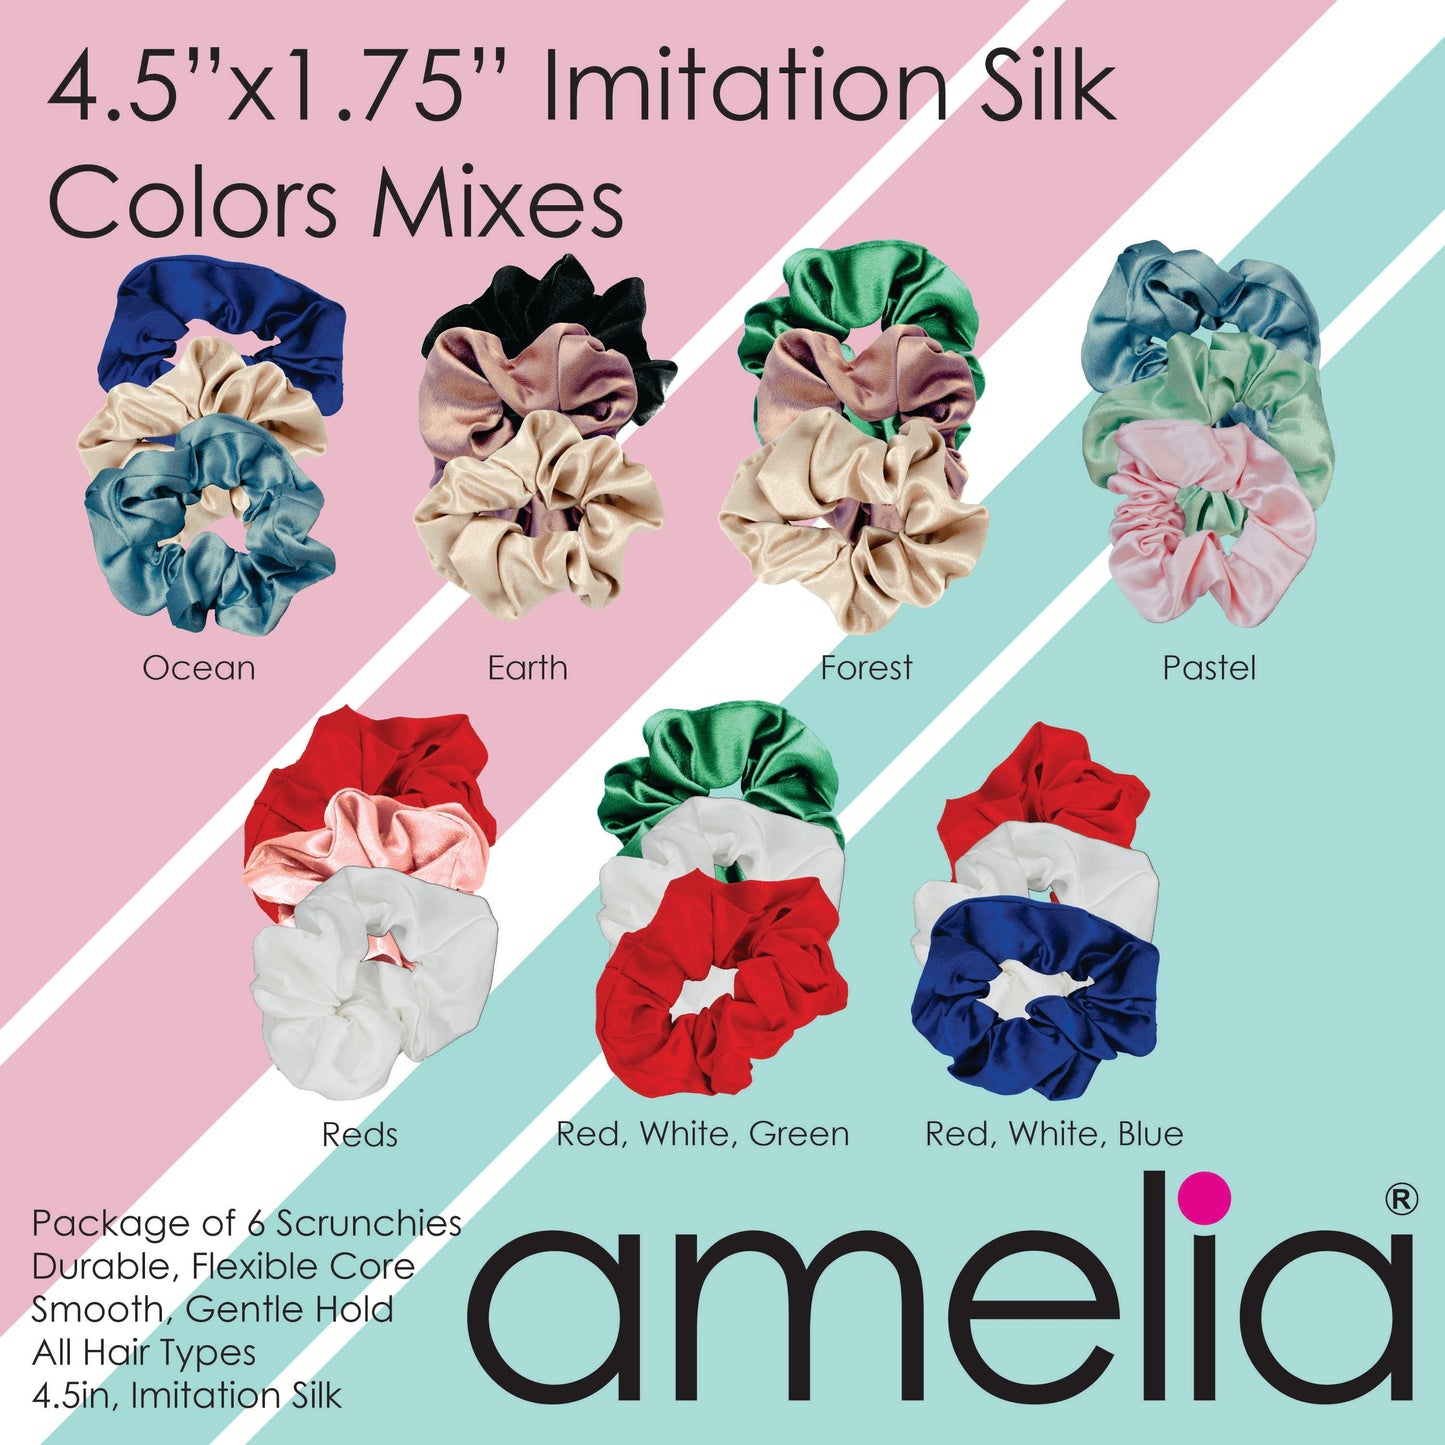 Amelia Beauty, Ocean Mix Imitation Silk Scrunchies, 4.5in Diameter, Gentle on Hair, Strong Hold, No Snag, No Dents or Creases. 6 Pack